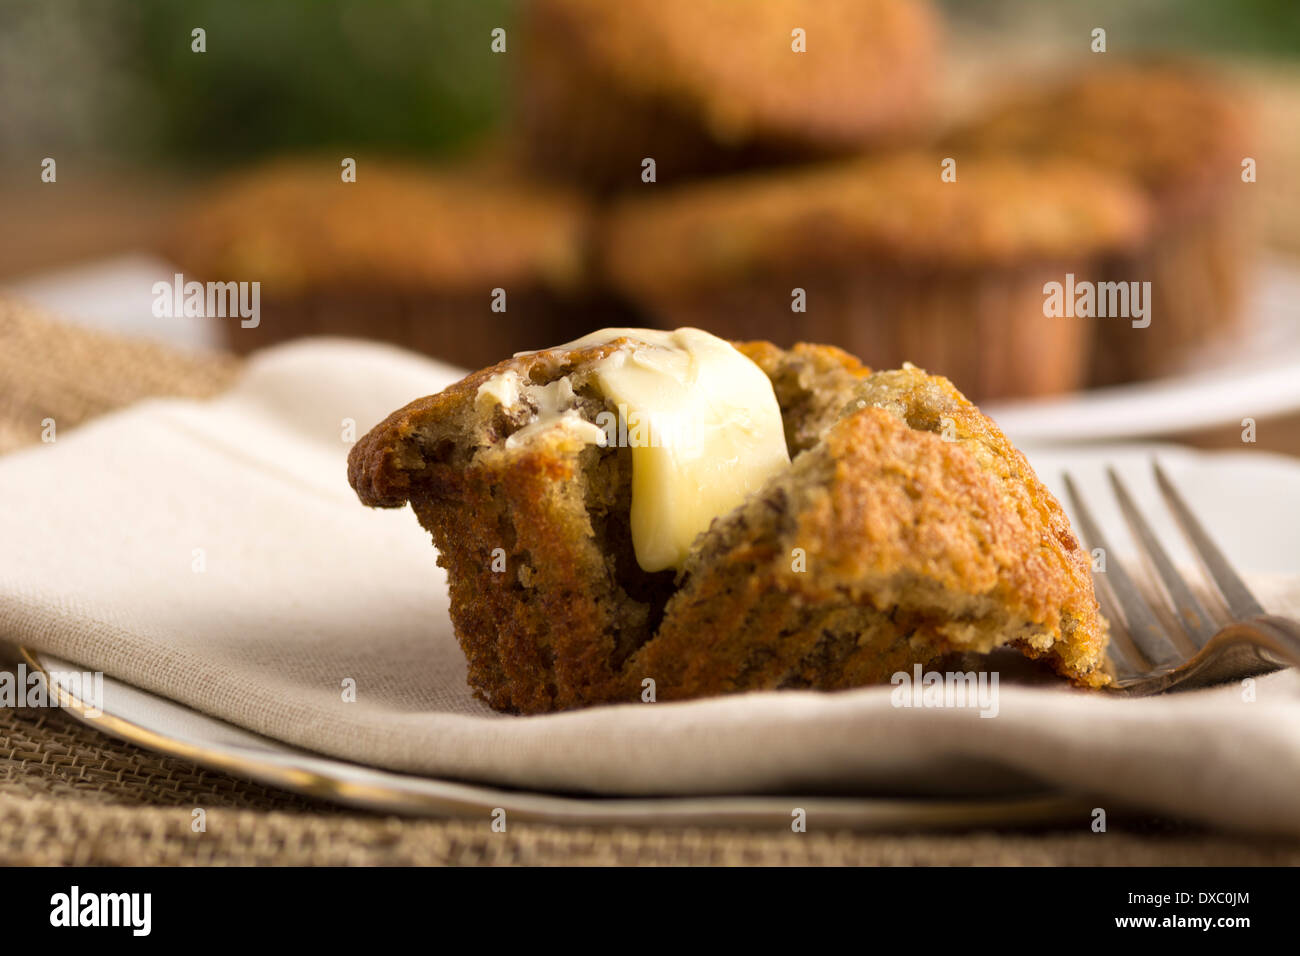 Fresh homemade banana muffin with melted butter Stock Photo